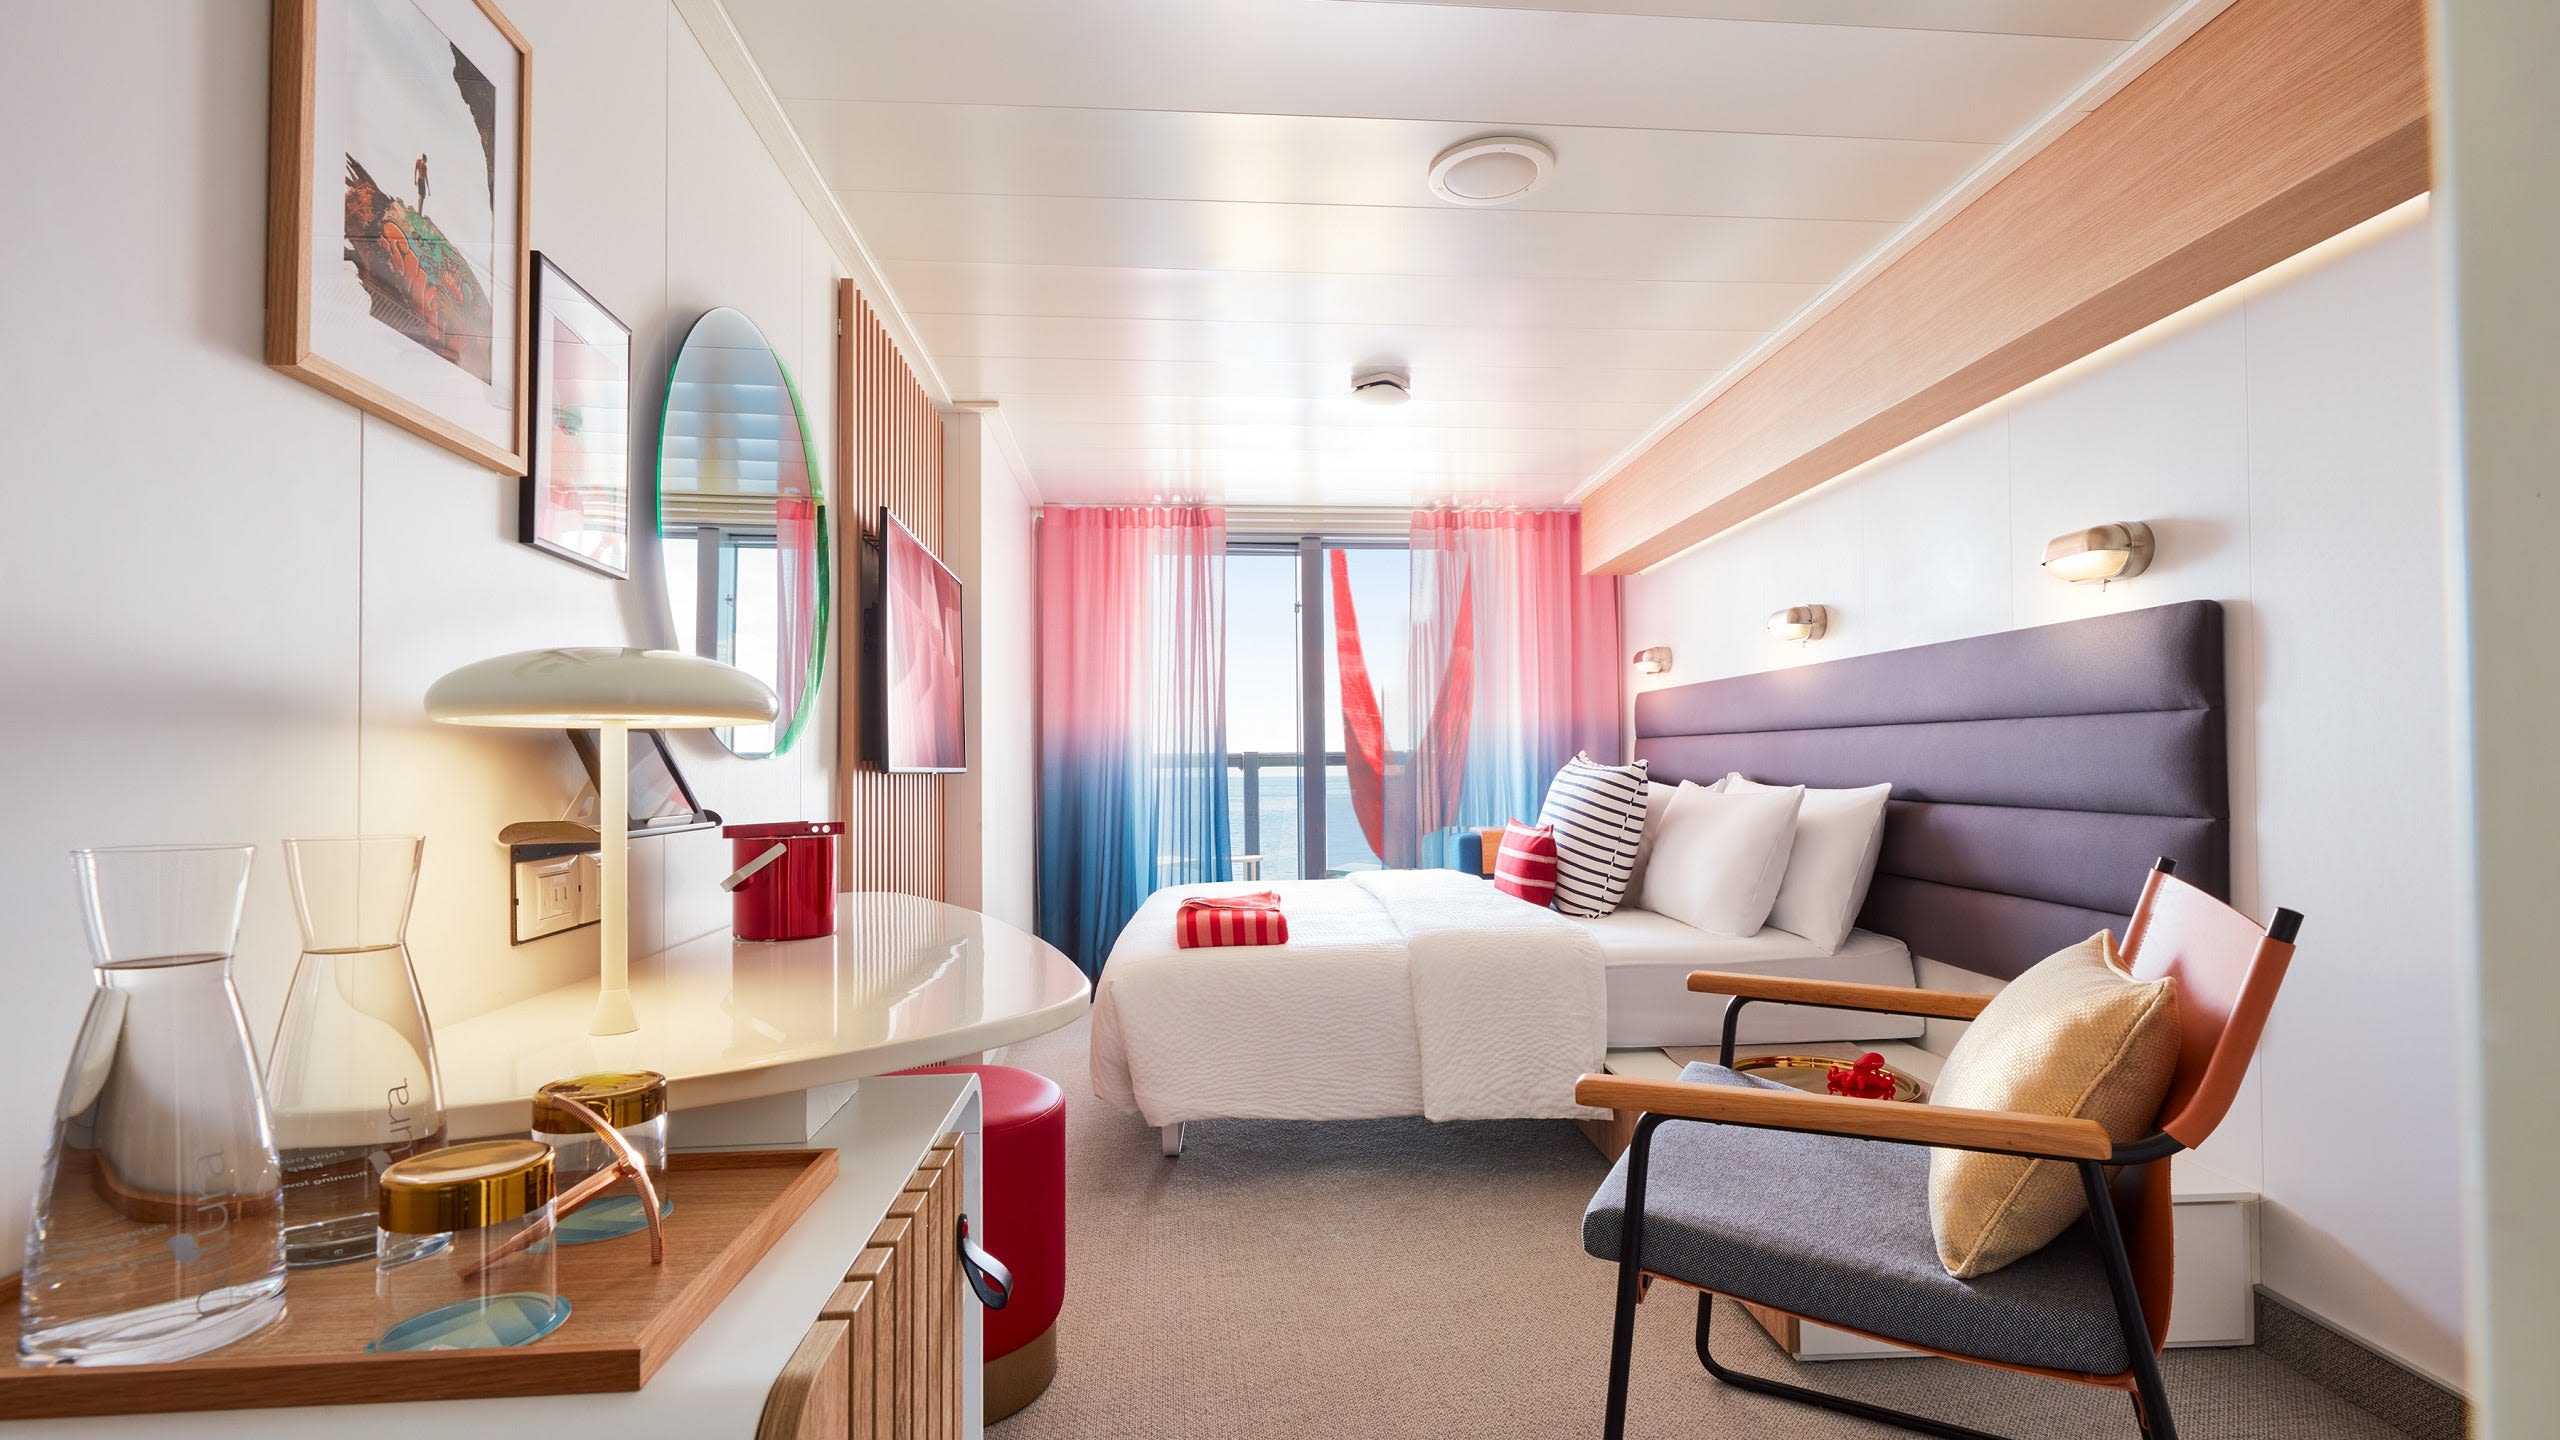 A cabin on Virgin Voyages Valiant Lady ship